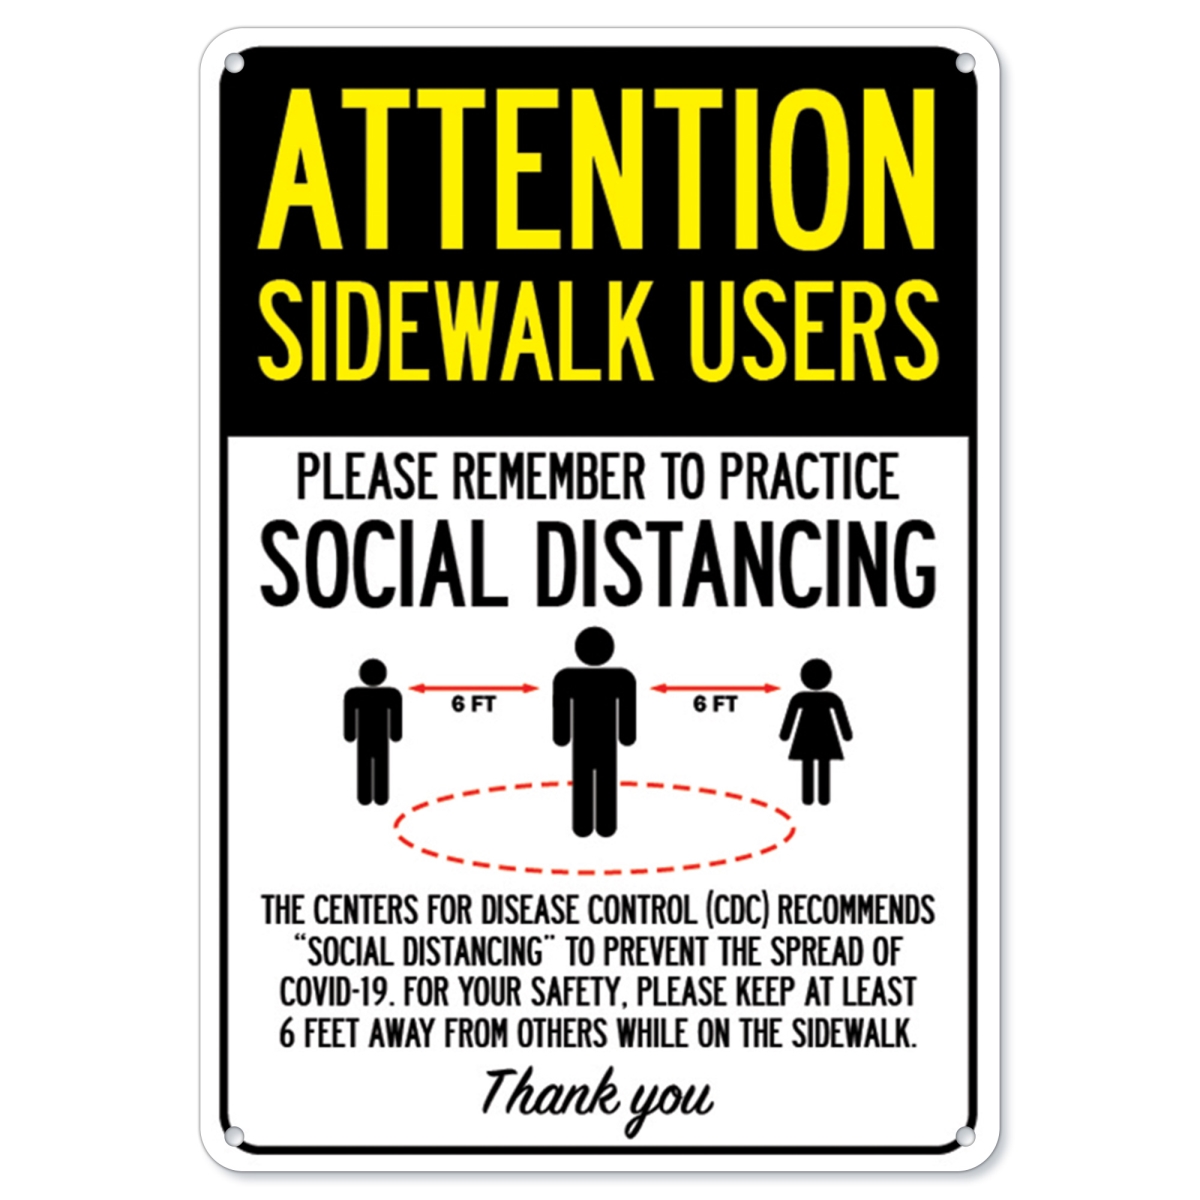 SignMission OS-NS-P-1014-25375 Covid-19 Notice Plastic Sign - Attention Sidewalk Users Practice Social Distancing